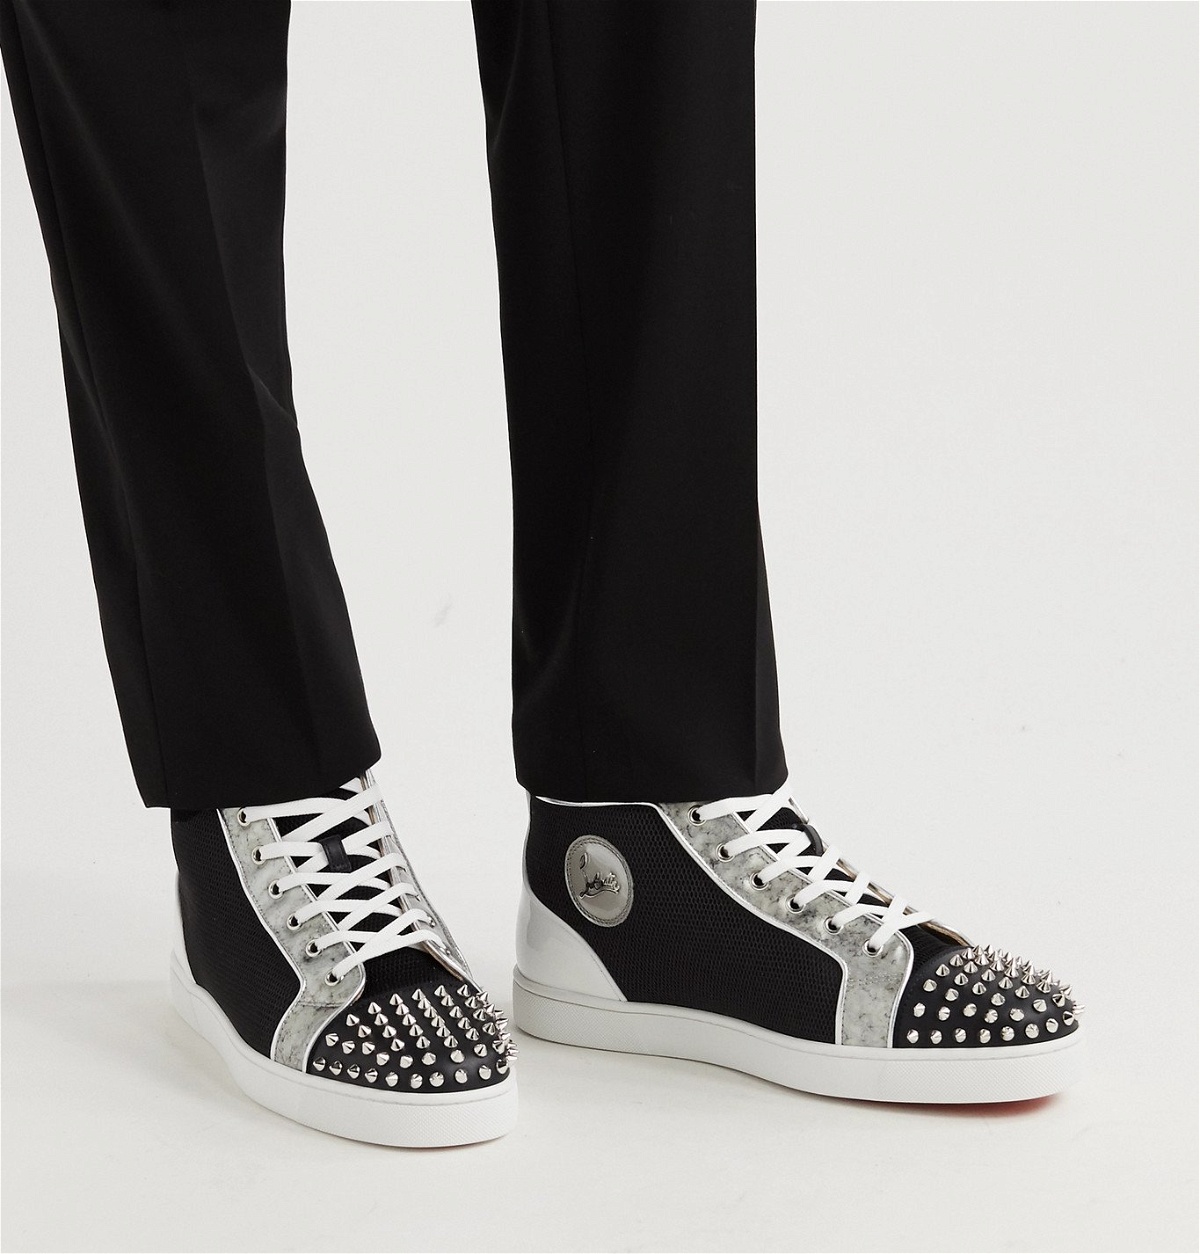 Christian Louboutin Leather High-top Sneaker in White for Men